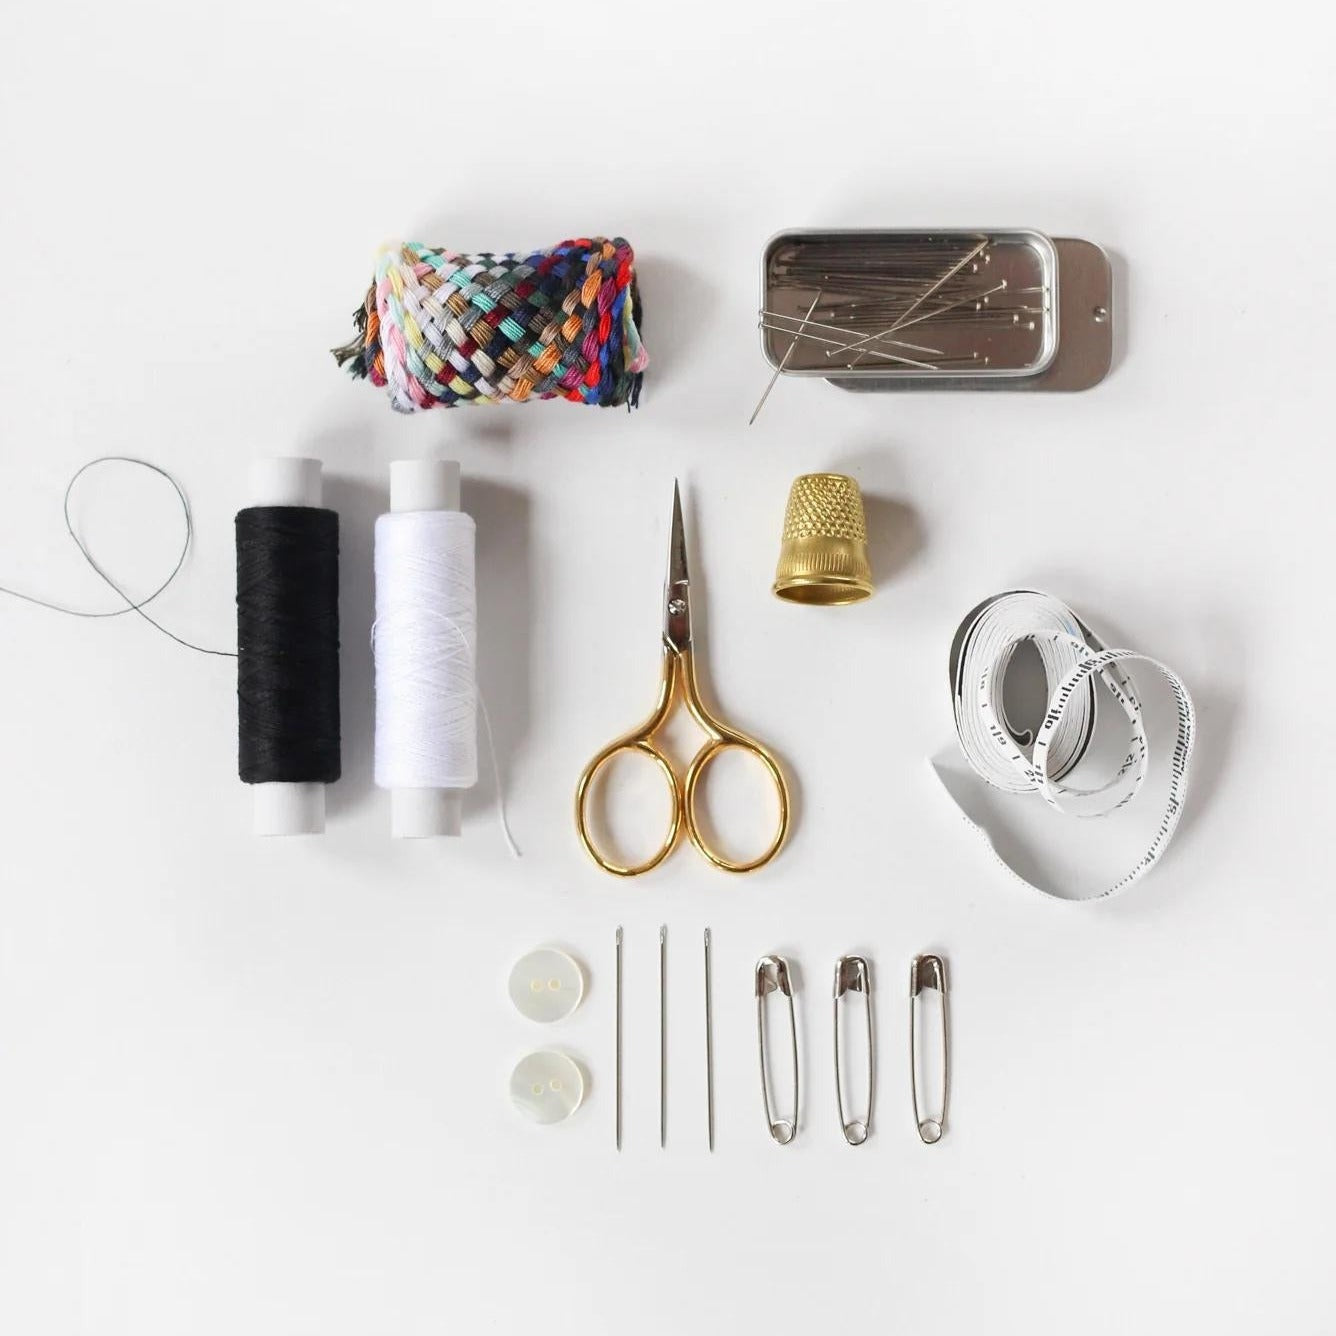 sewing kit from studio carta italy